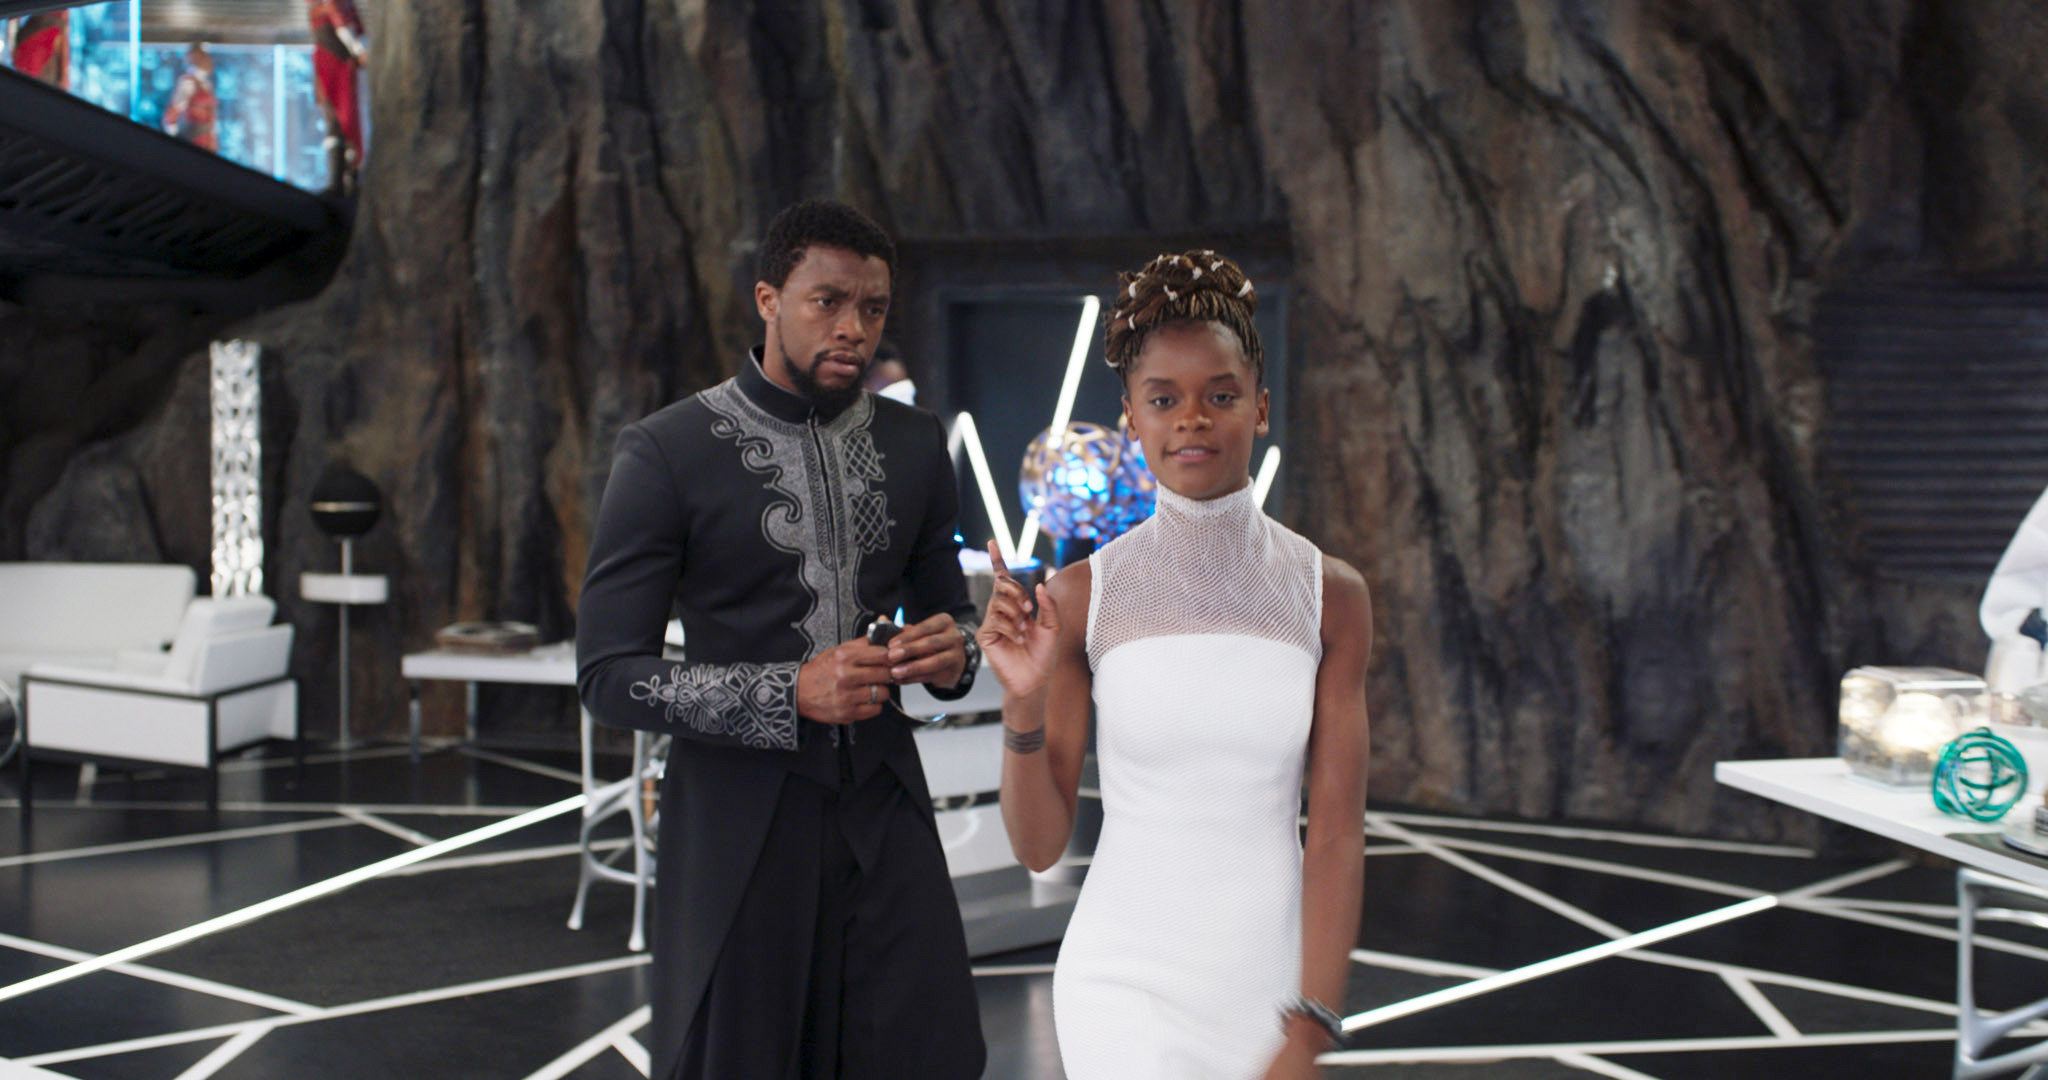 Chadwick Boseman and Letitia Wright in Black Panther